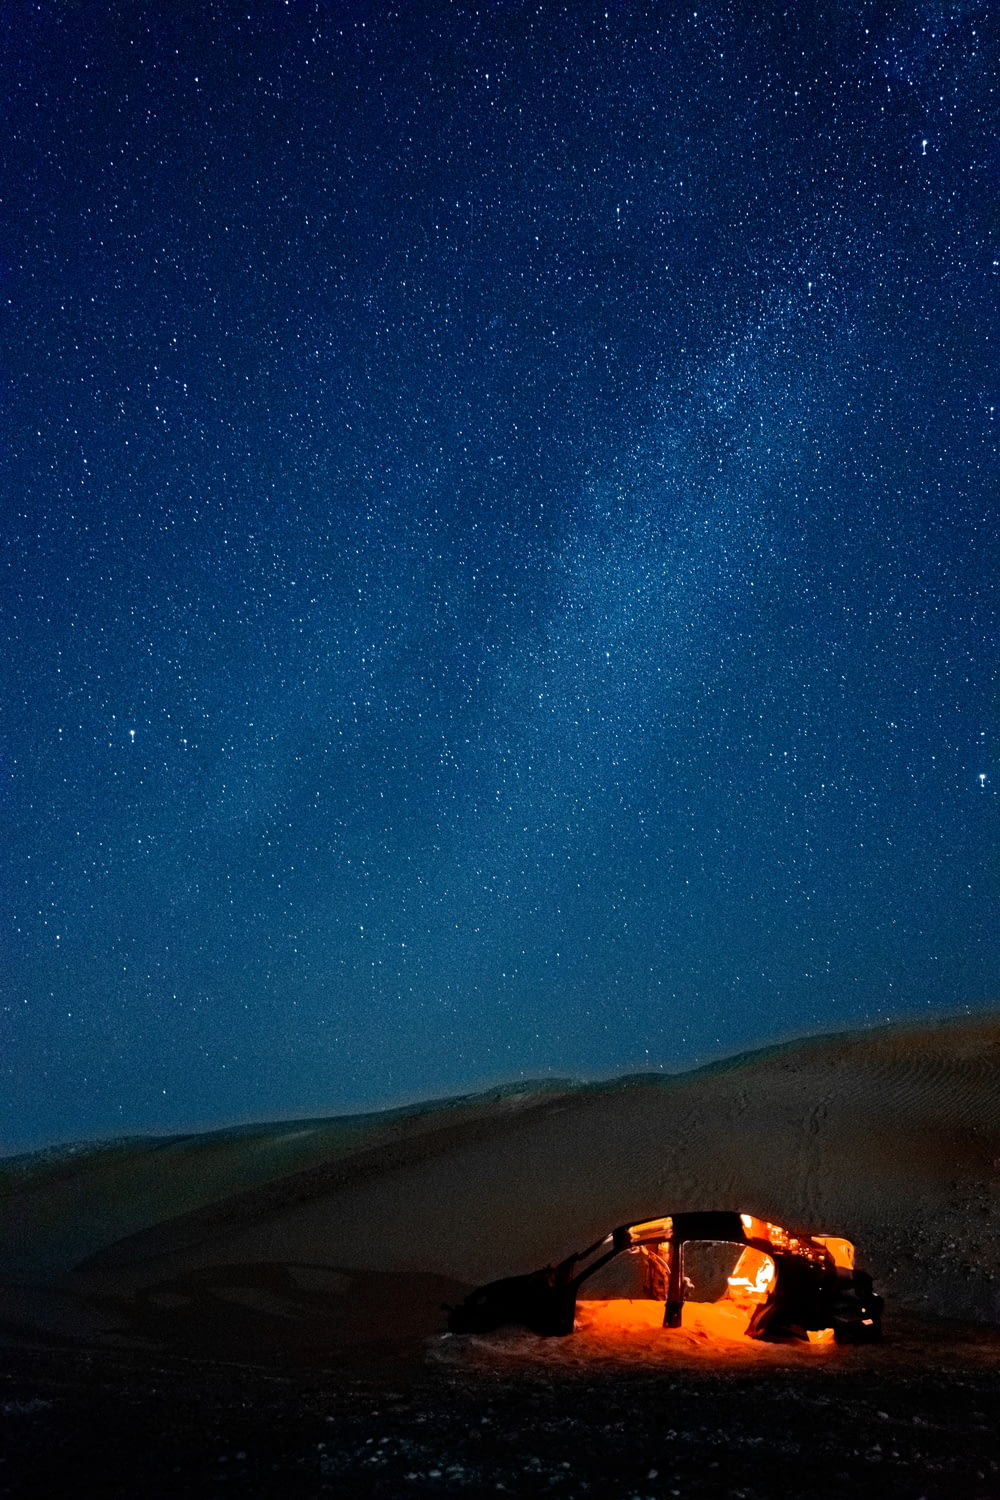 a tent in the middle of a desert under a night sky filled with stars